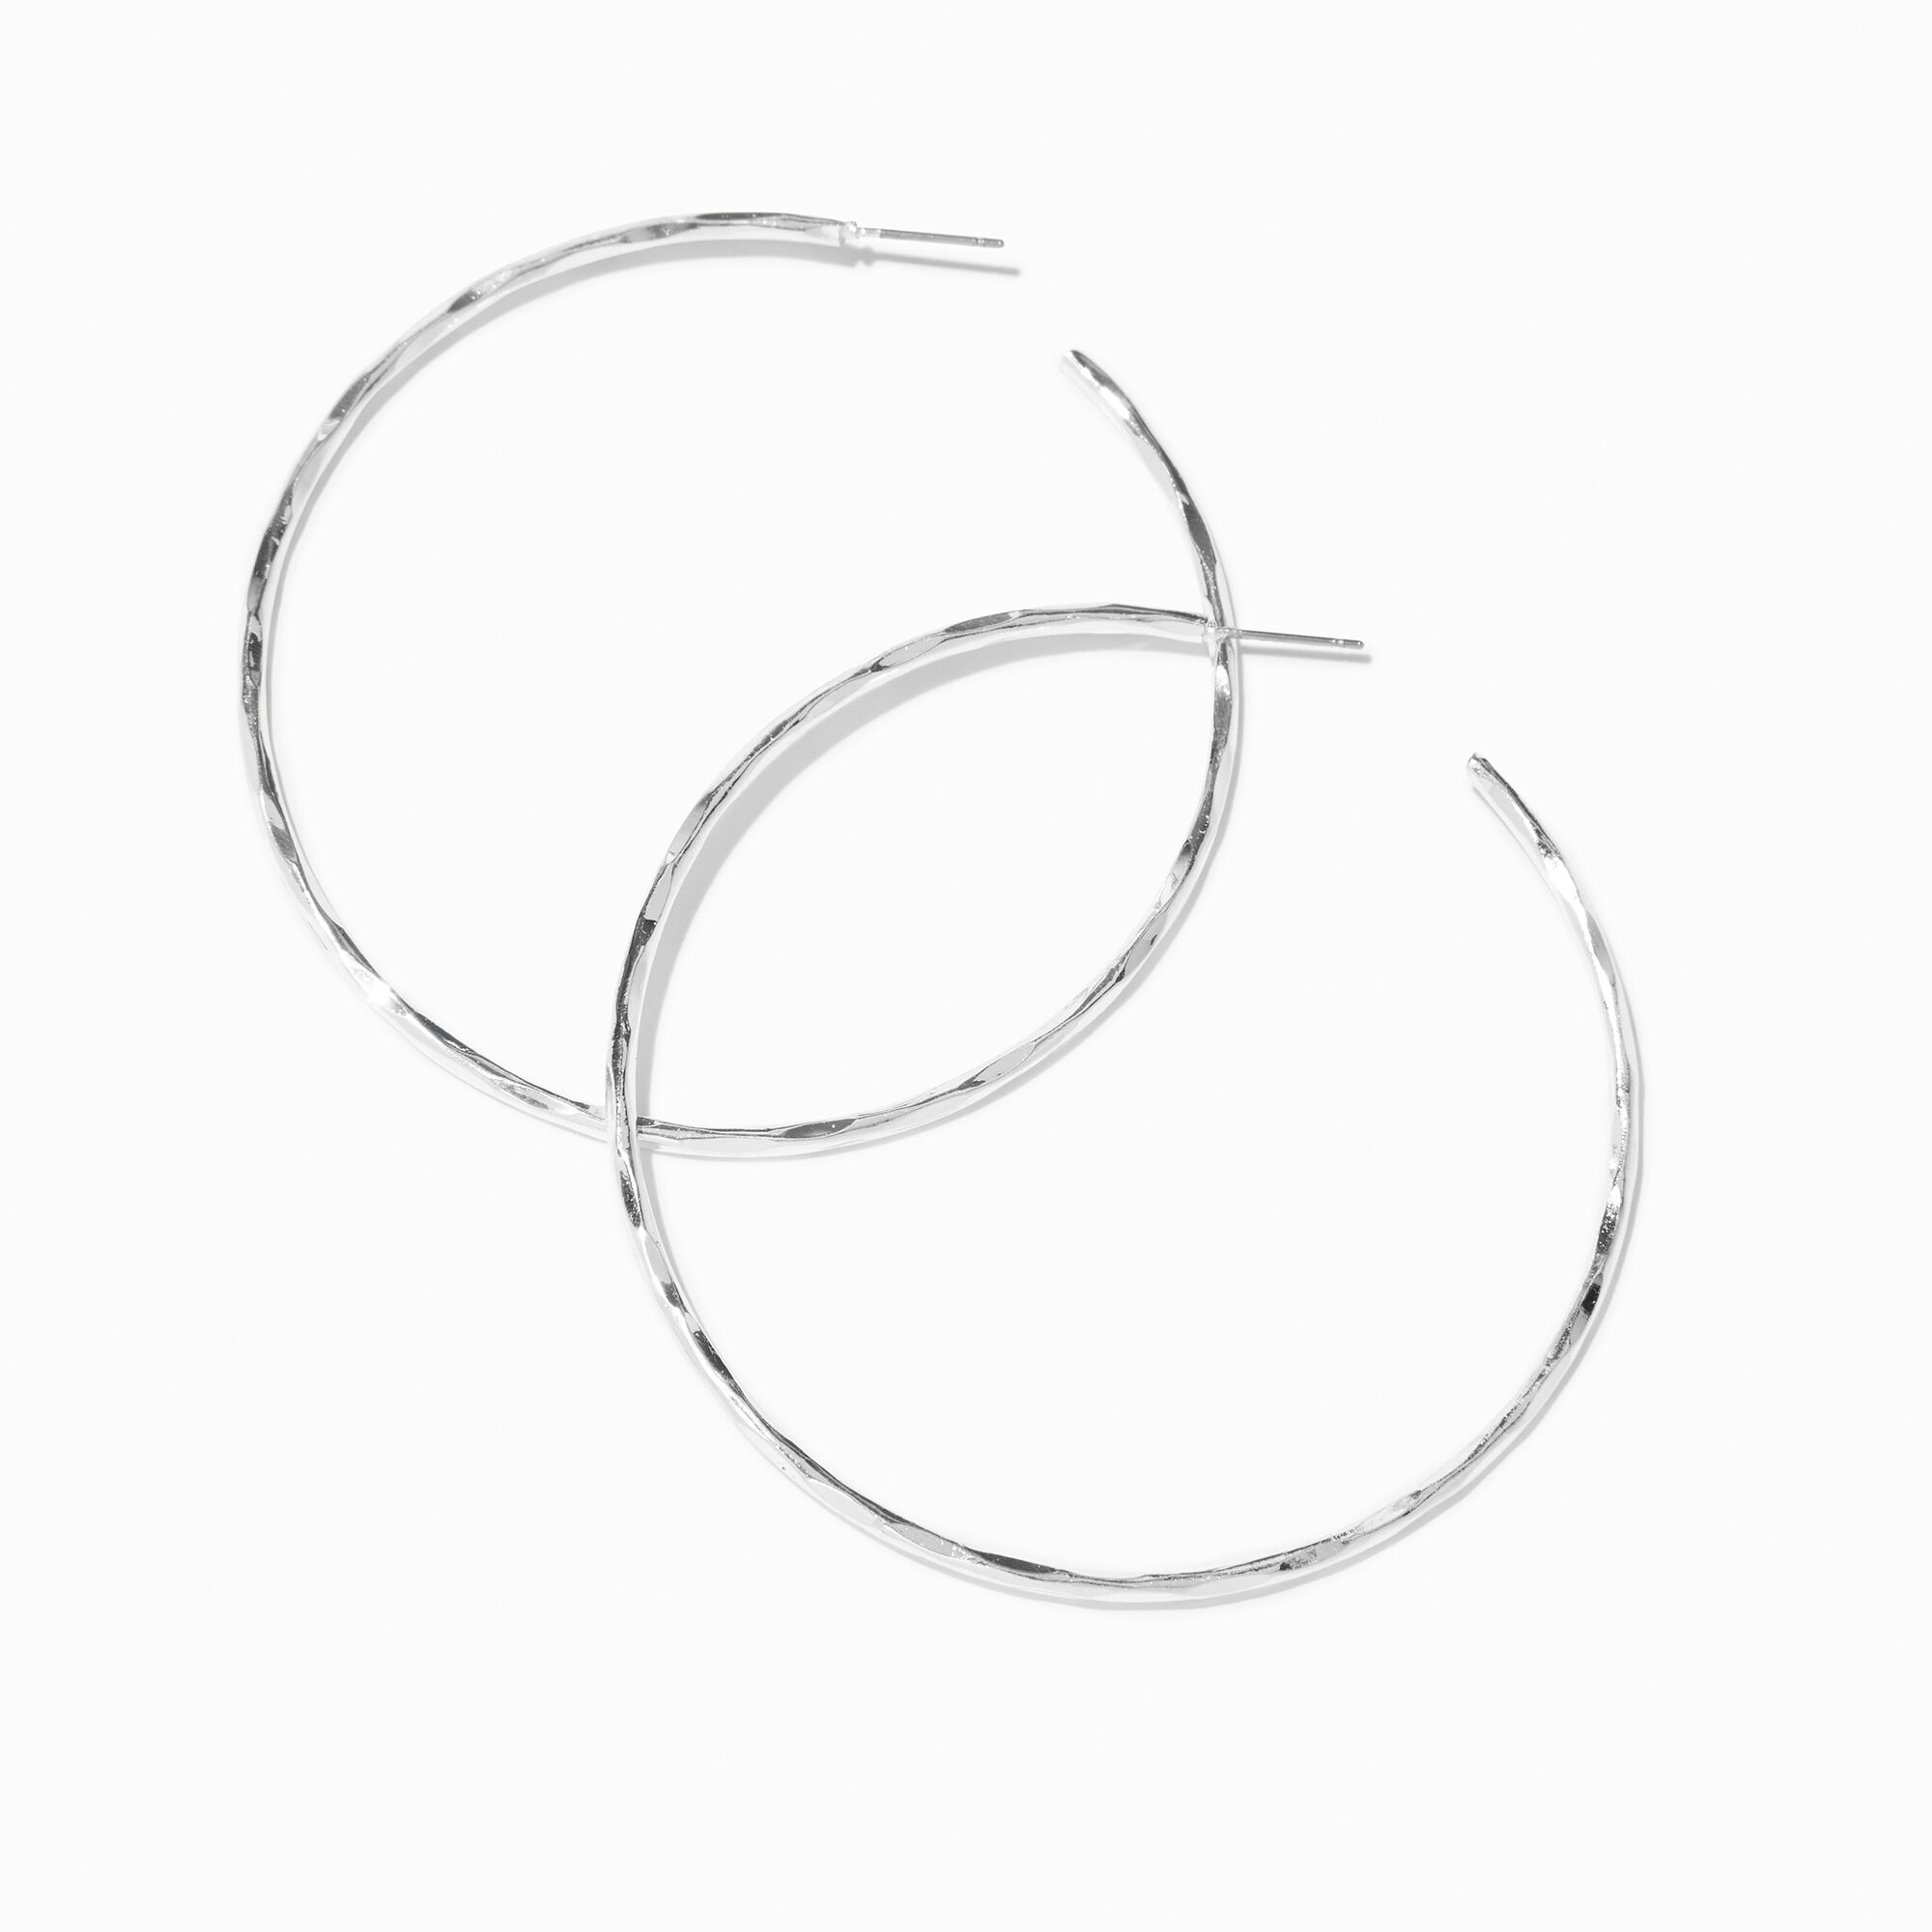 View Claires Tone Textured 70MM Hoop Earrings Silver information